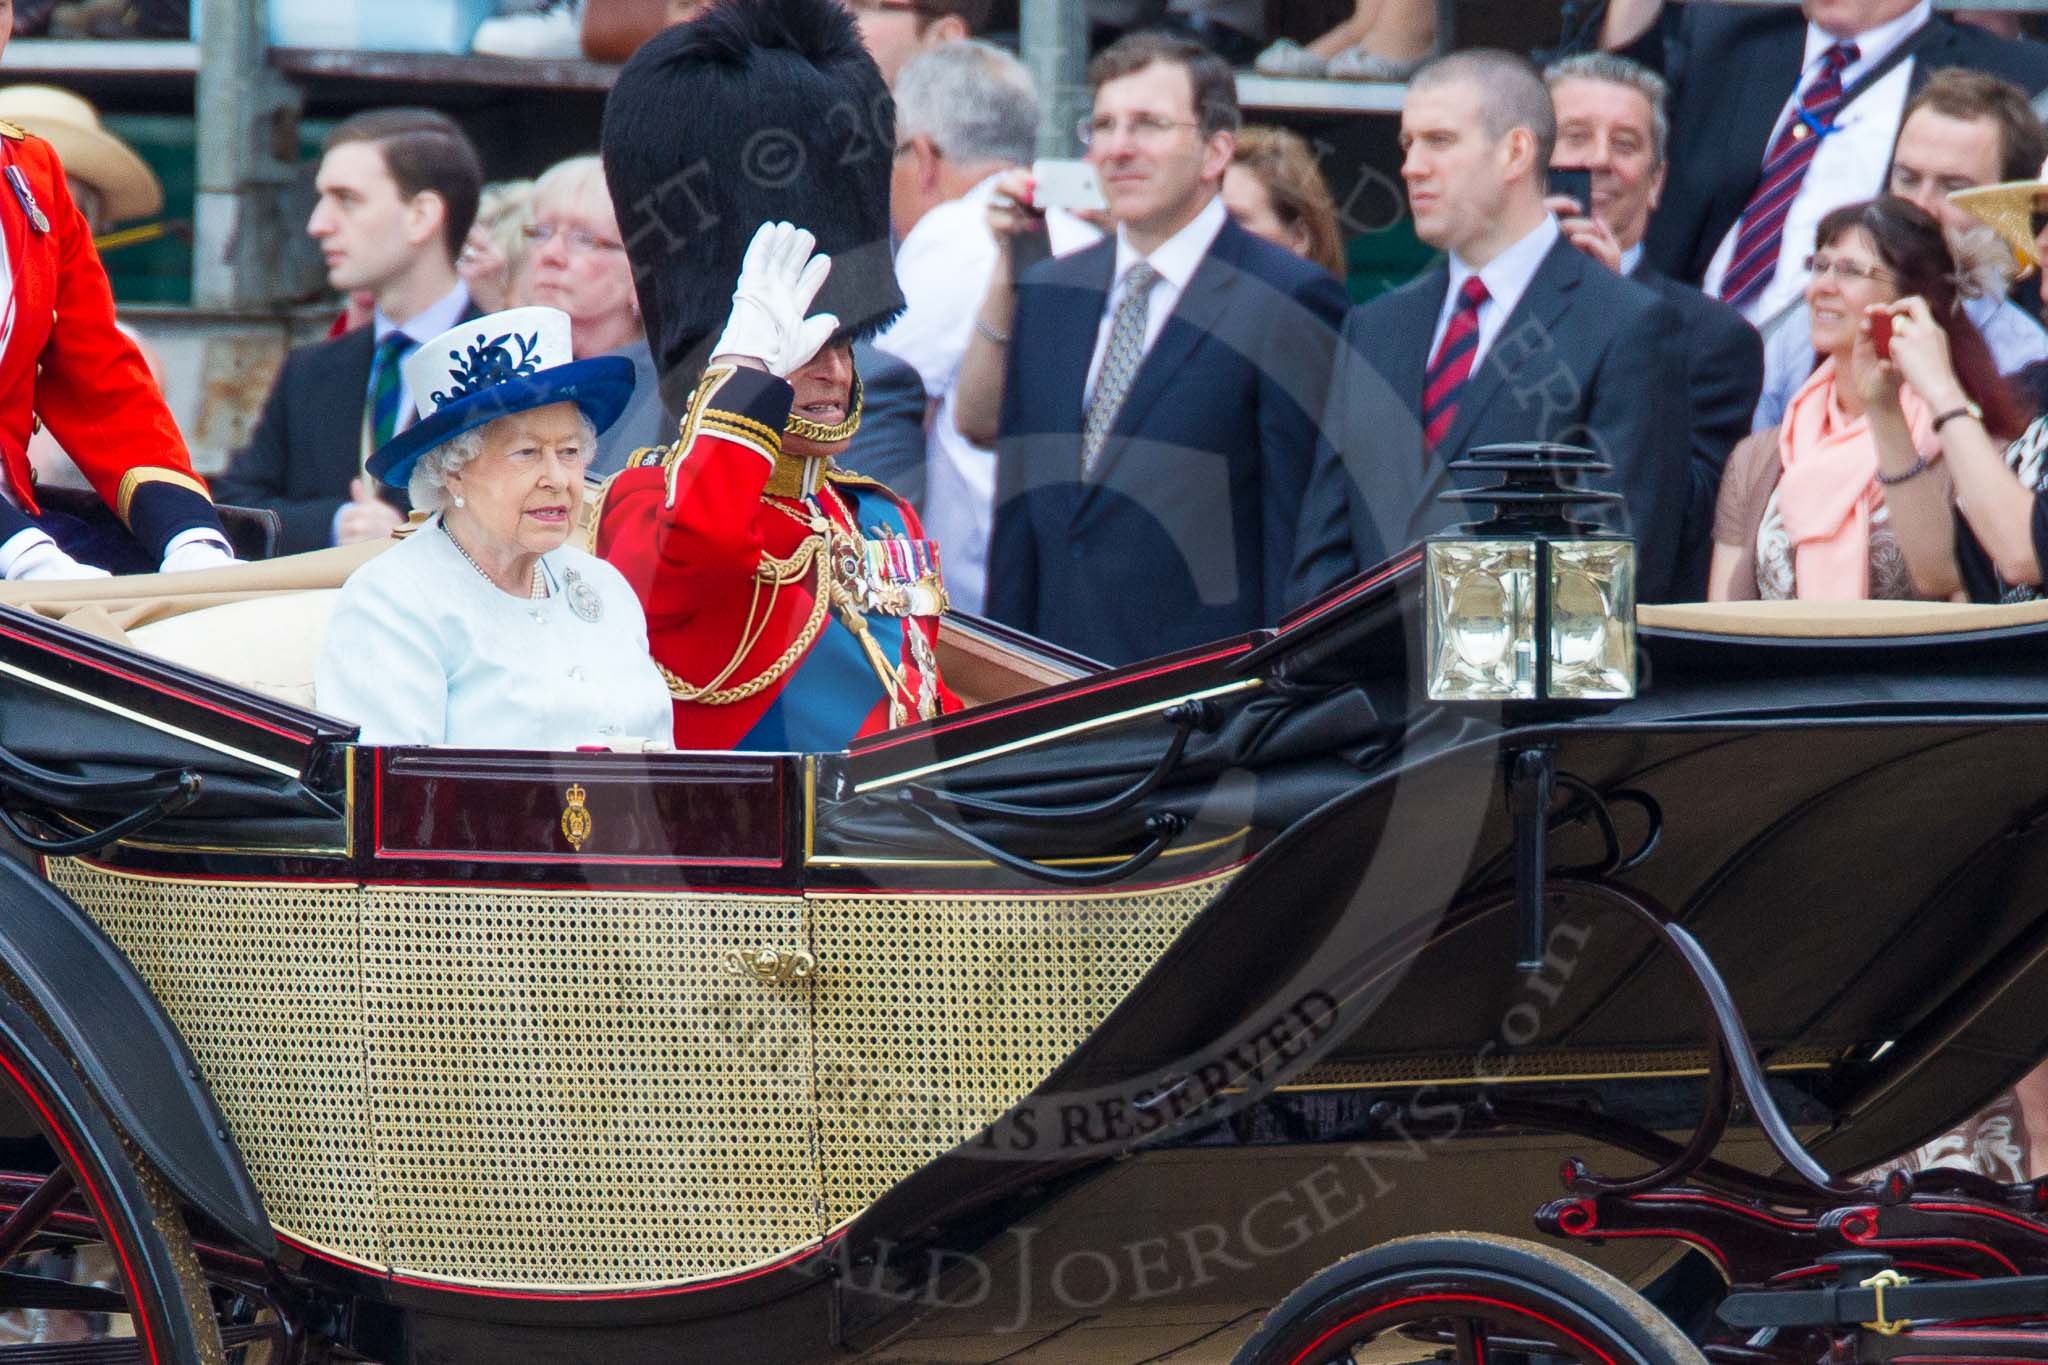 Trooping the Colour 2014.
Horse Guards Parade, Westminster,
London SW1A,

United Kingdom,
on 14 June 2014 at 10:58, image #343